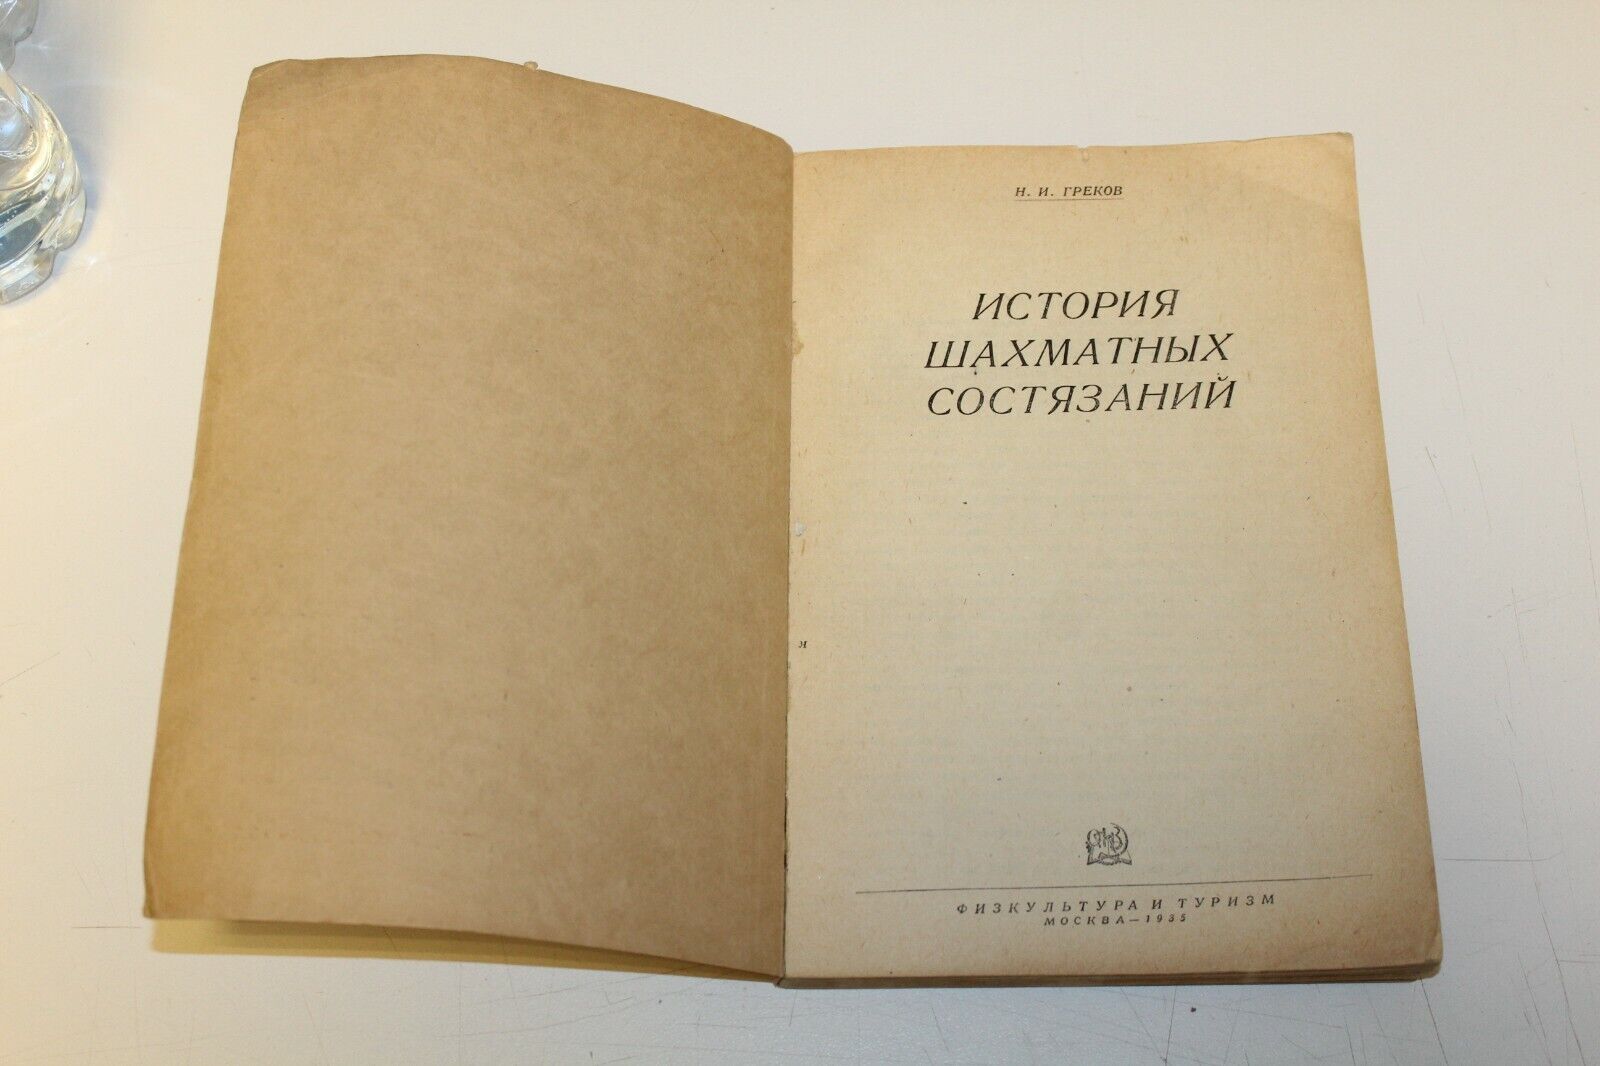 11008.Chess Book N.Grekov. The history of chess competitions.1935